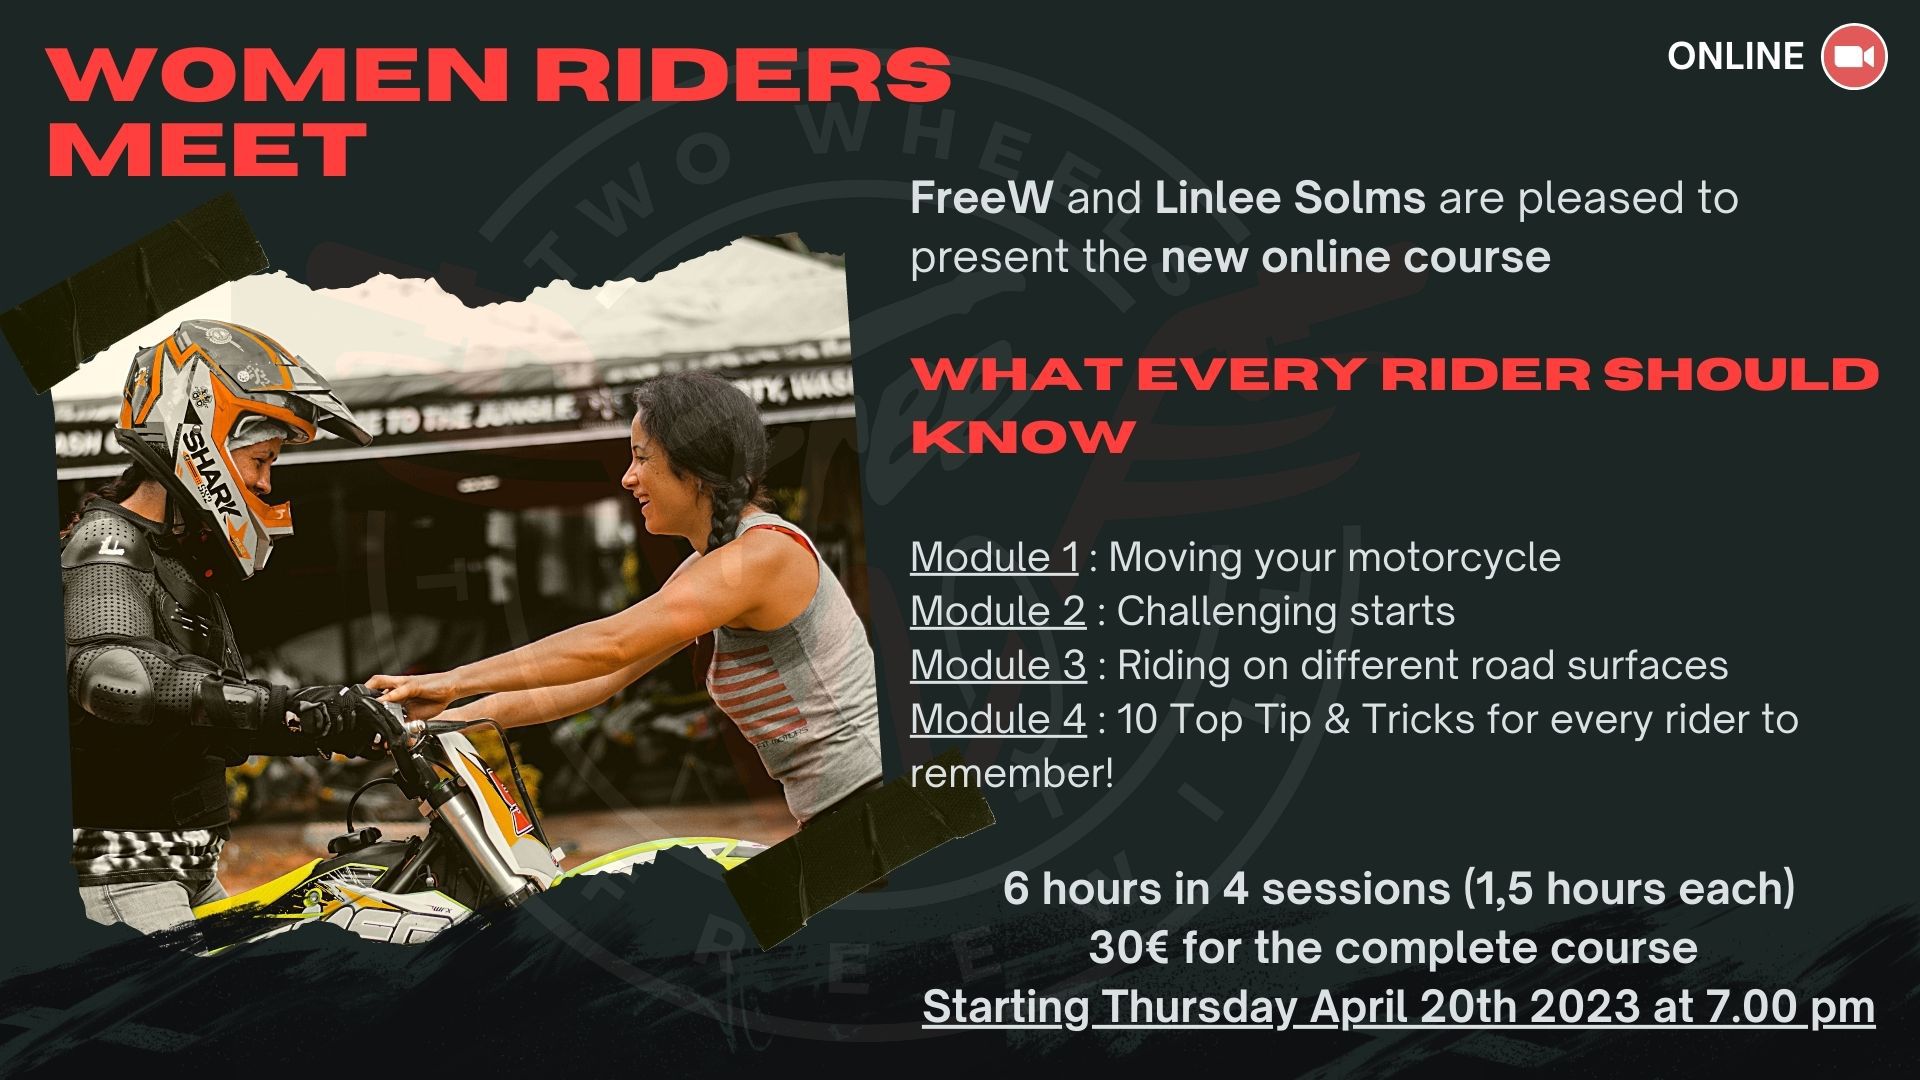 FB post 1 - Women riders meet - what every rider should know (3)